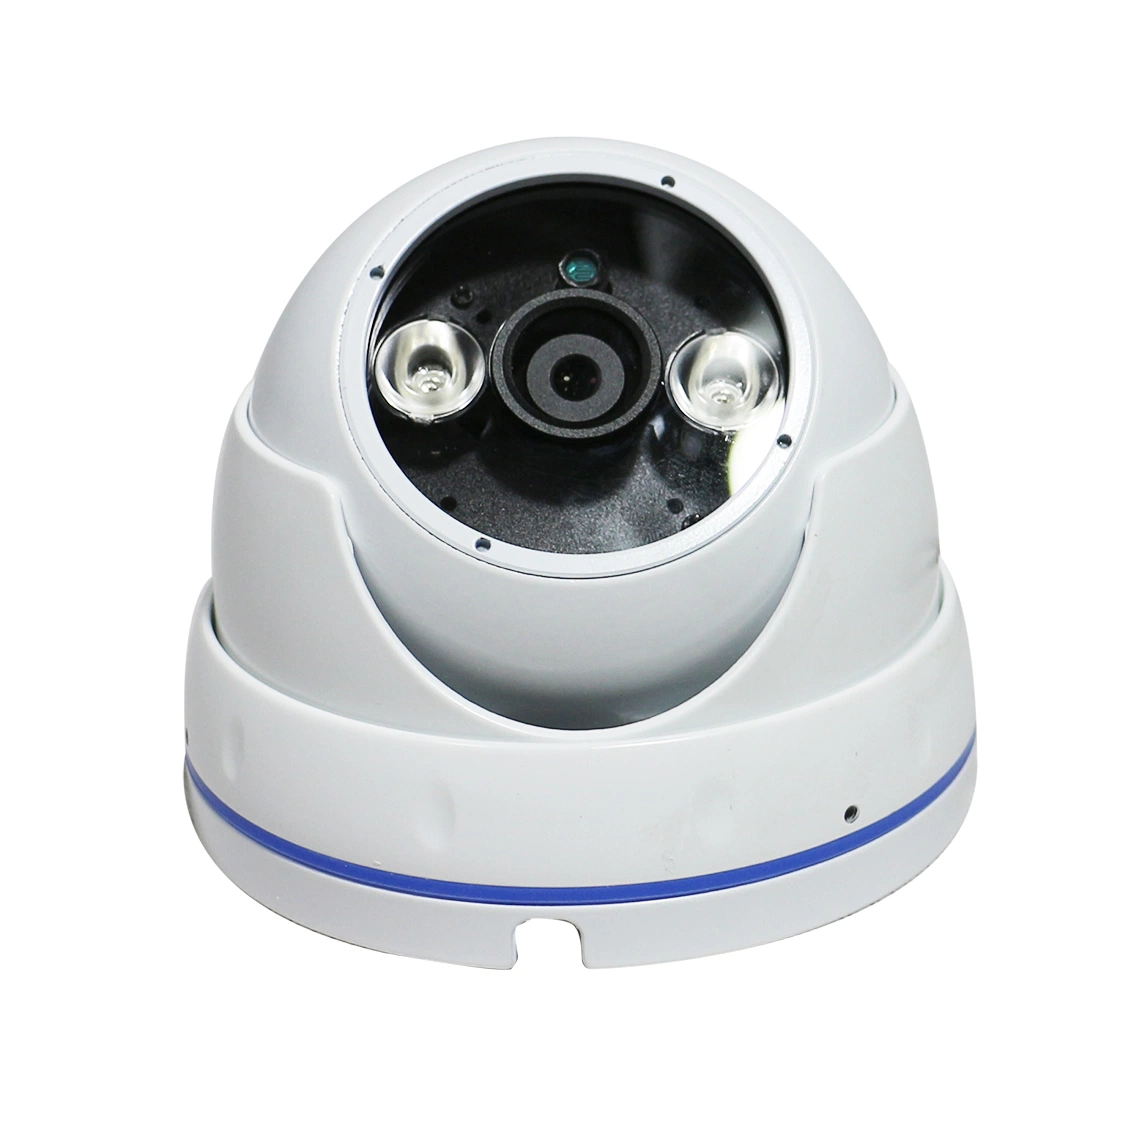 Professional High Resolution Eco SIP IP PA System Camera Security IP High Speed Network Infrared Dome Camera with High Performance